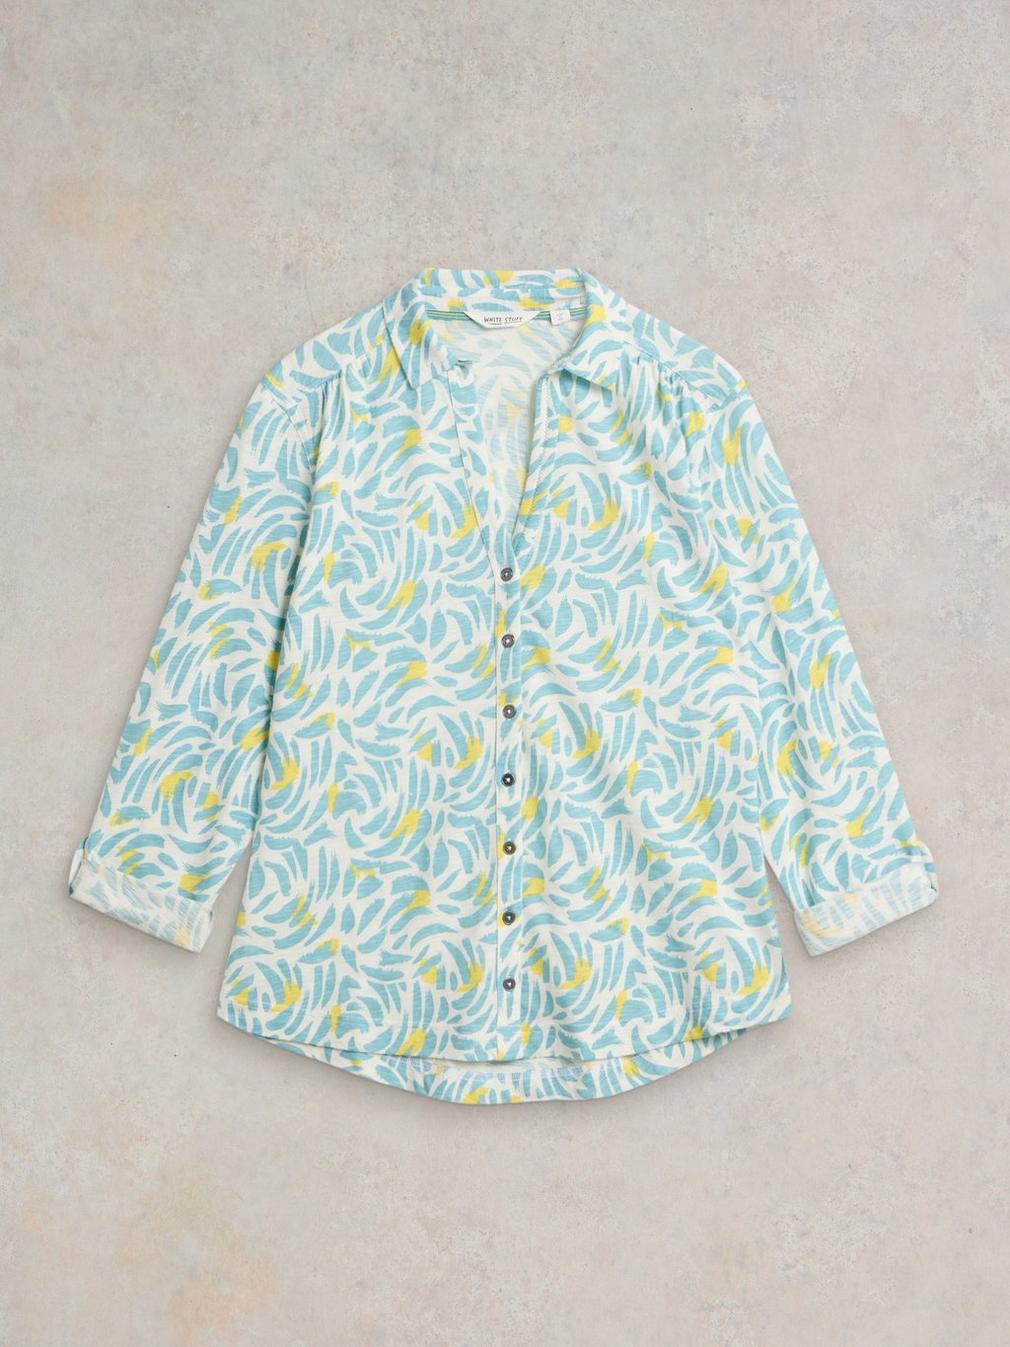 ANNIE JERSEY PRINT SHIRT in WHITE MLT - FLAT FRONT